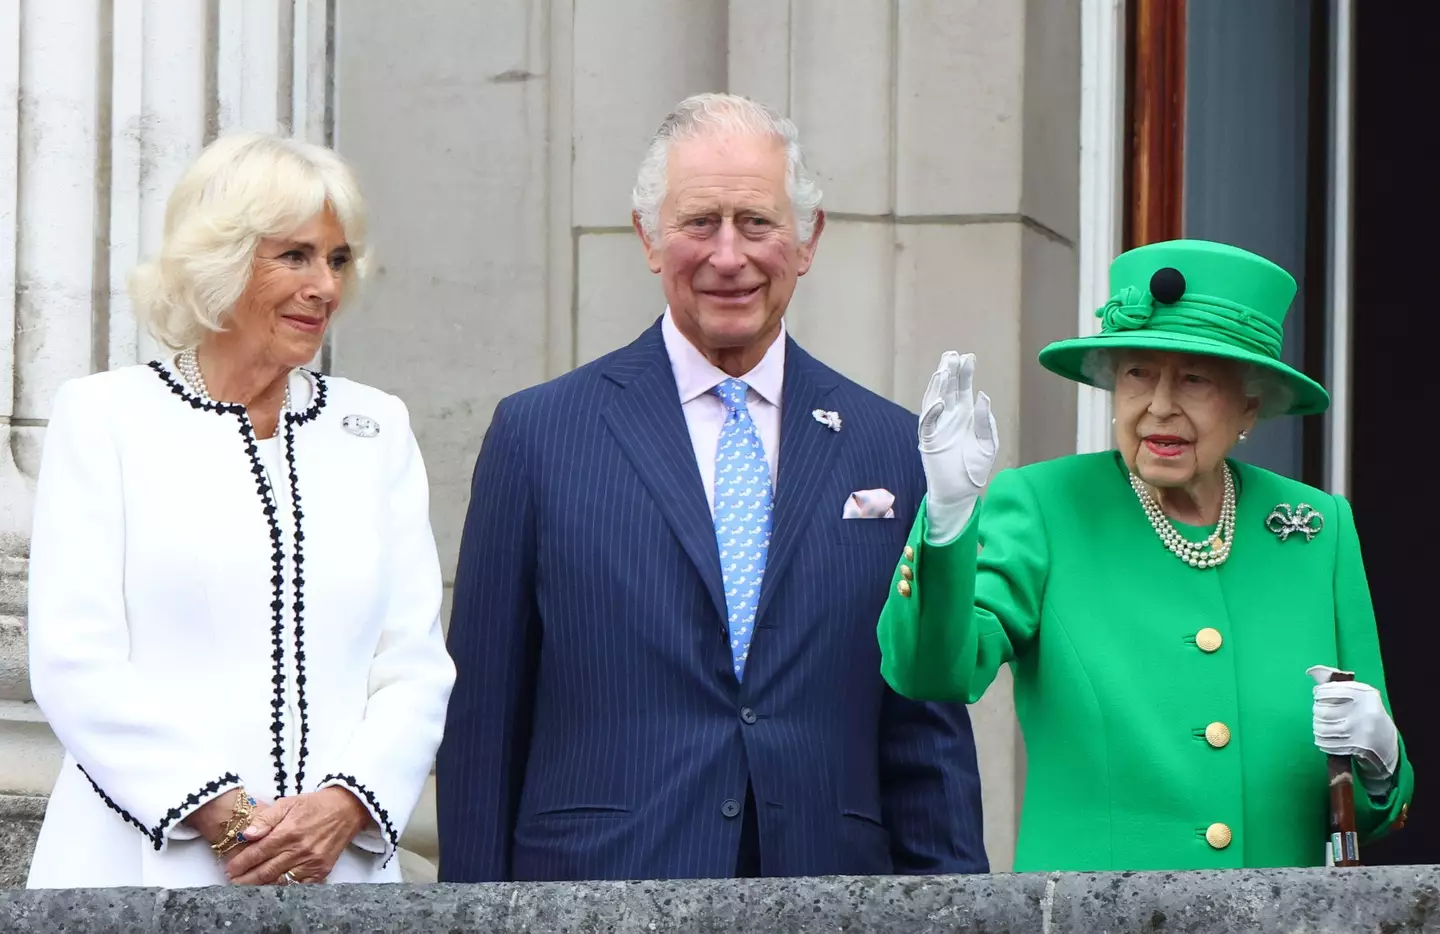 The former Prince of Wales will now be known as King Charles III.